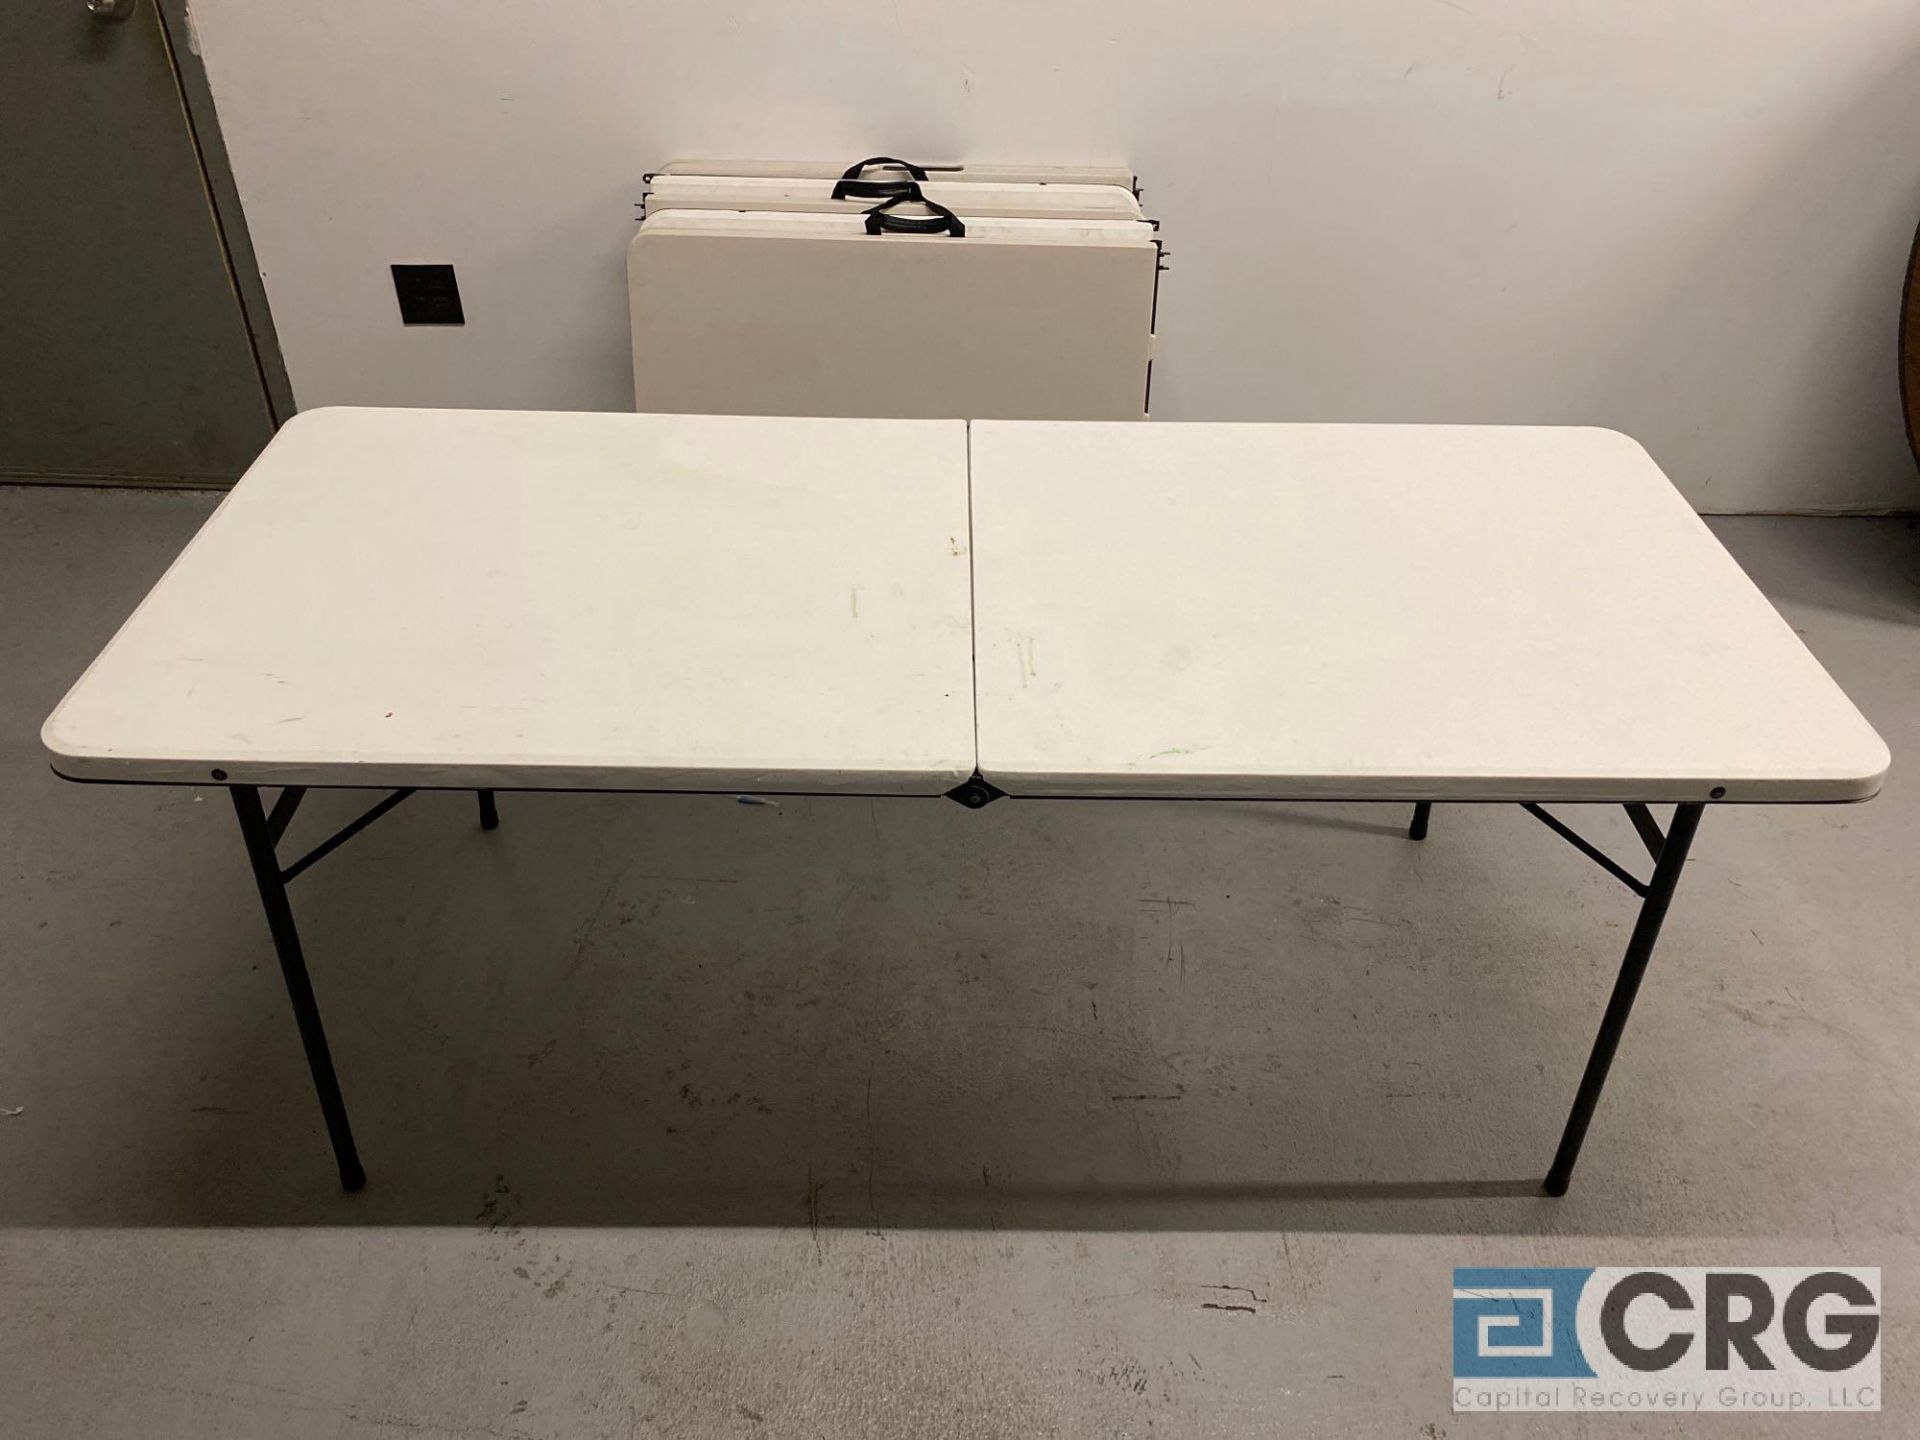 Folding Plastic Tables - Image 3 of 3